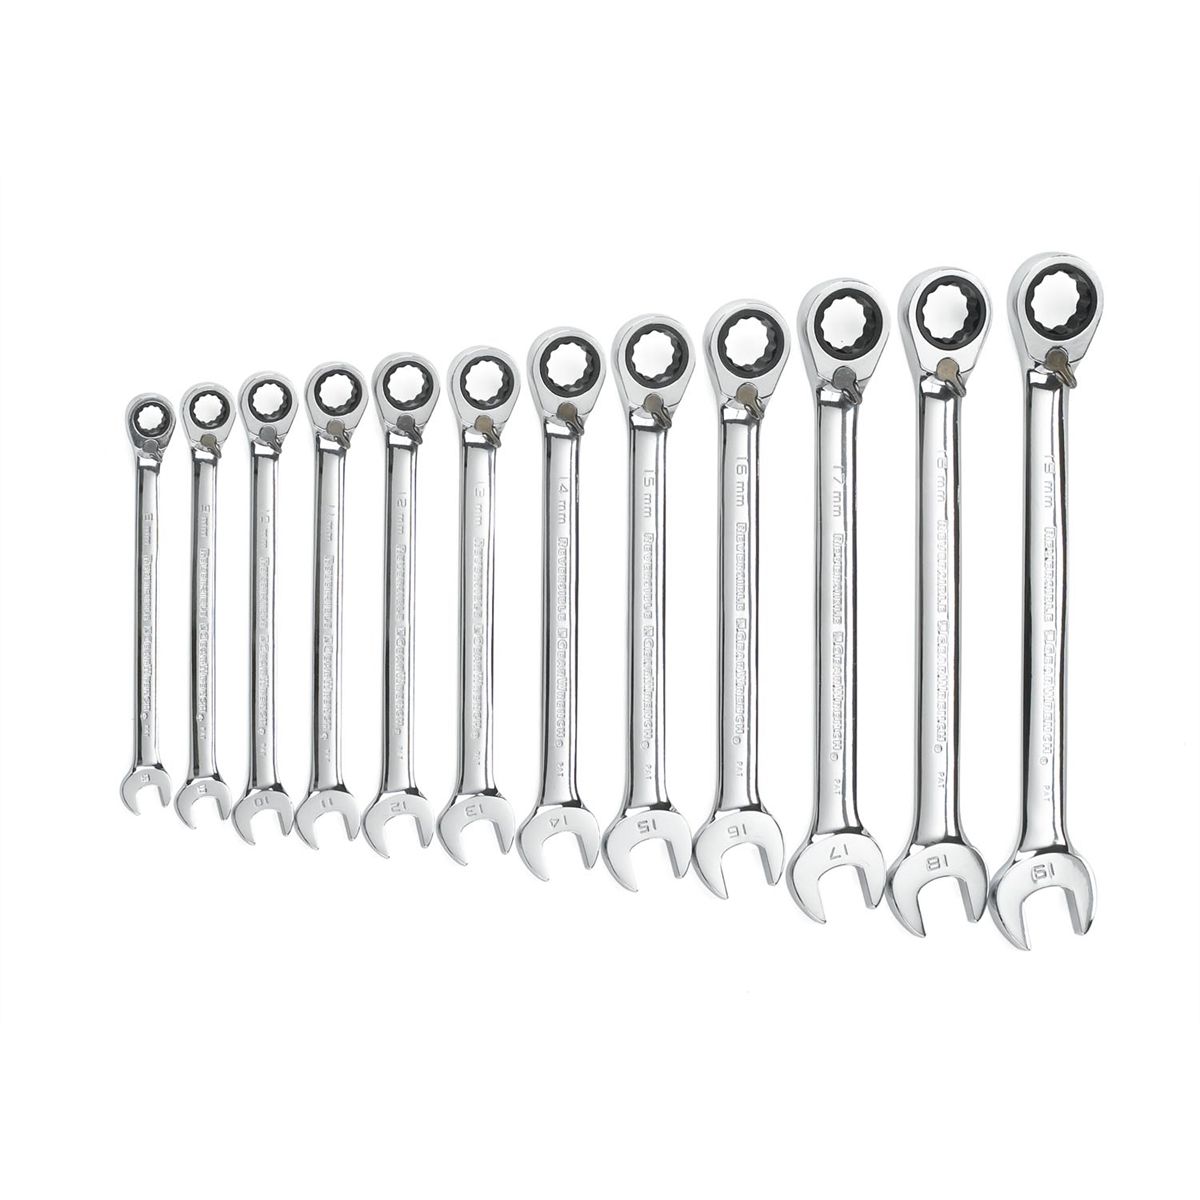 GearWrench 9602 16 Piece Metric Reversible Combination Ratcheting Wrench Set 